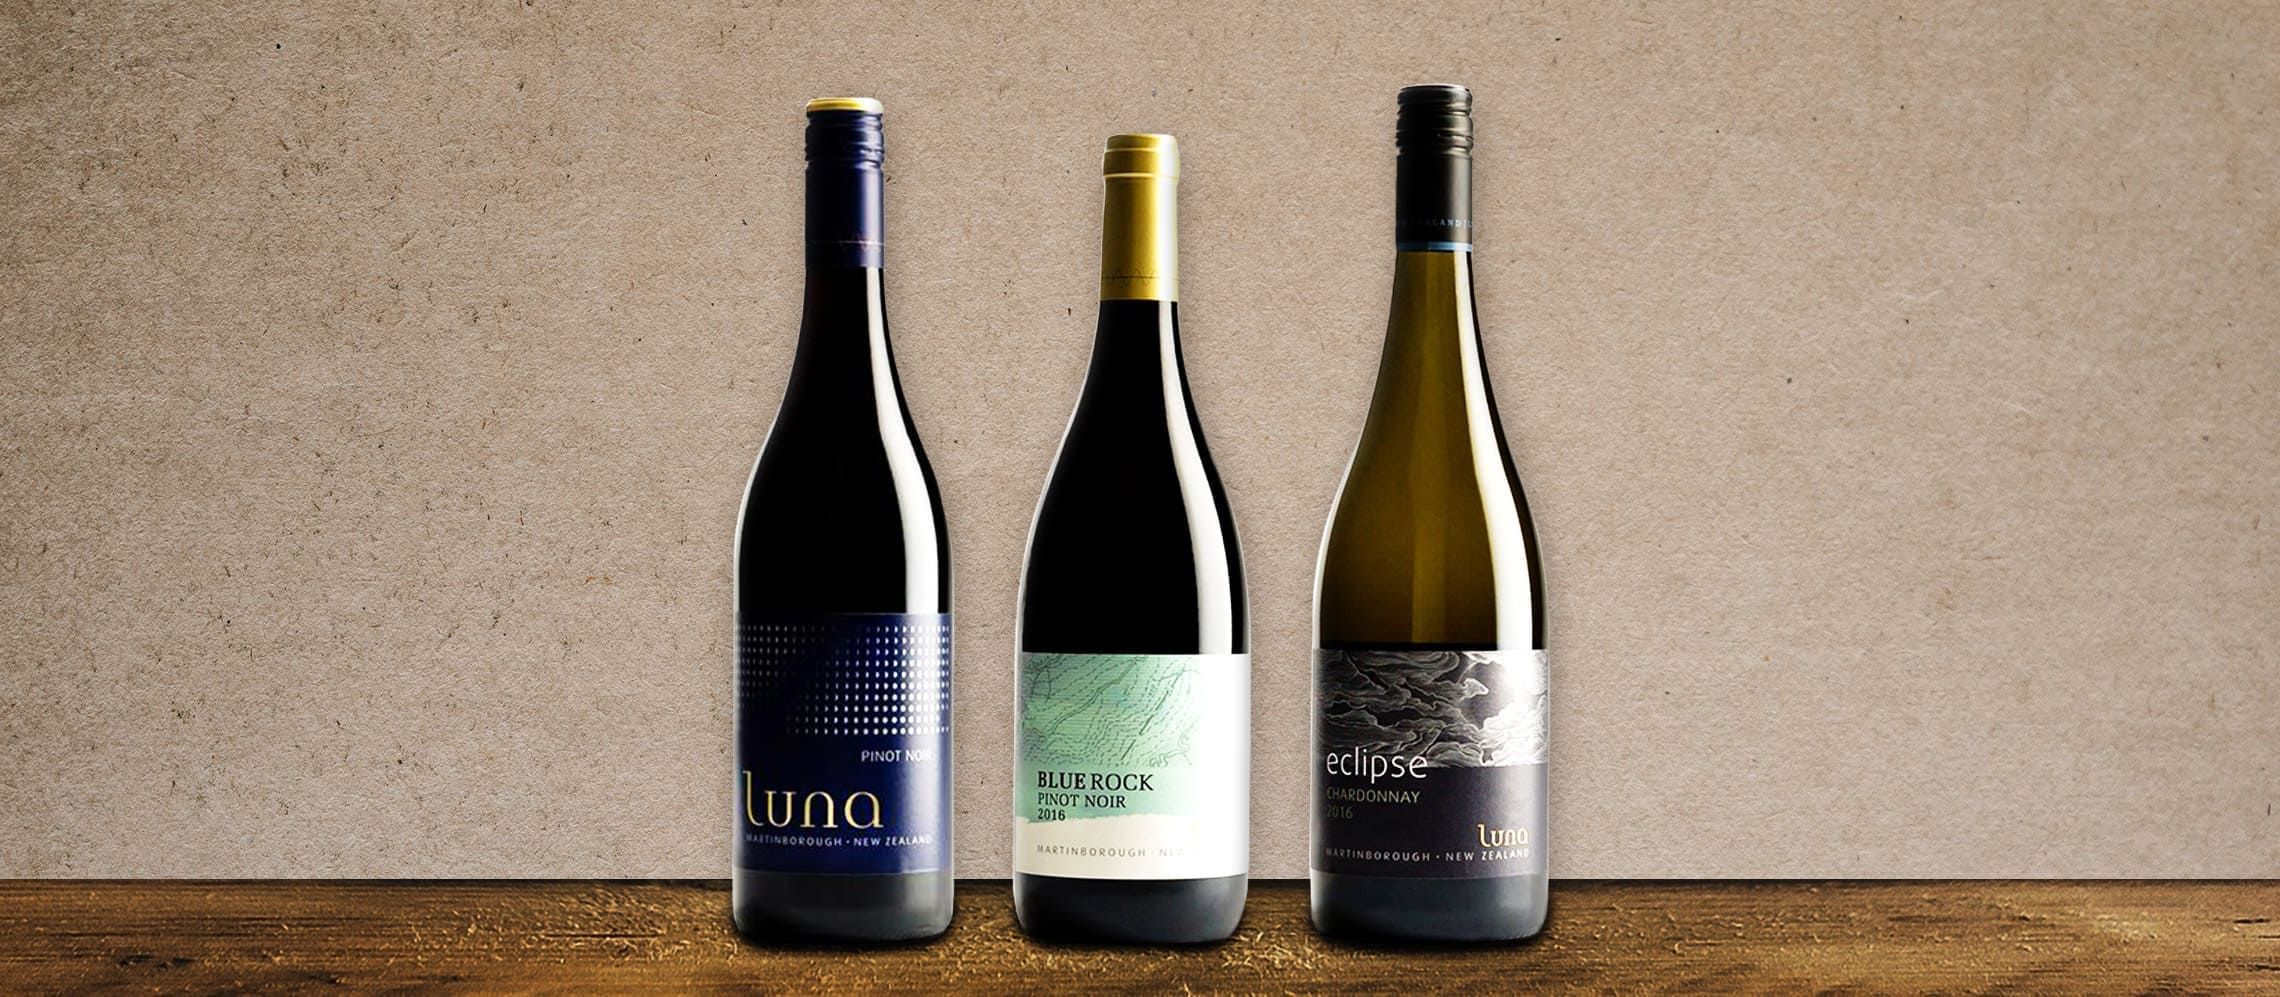 Photo for: Triple Treat for New Zealand’s Luna Estate Winery